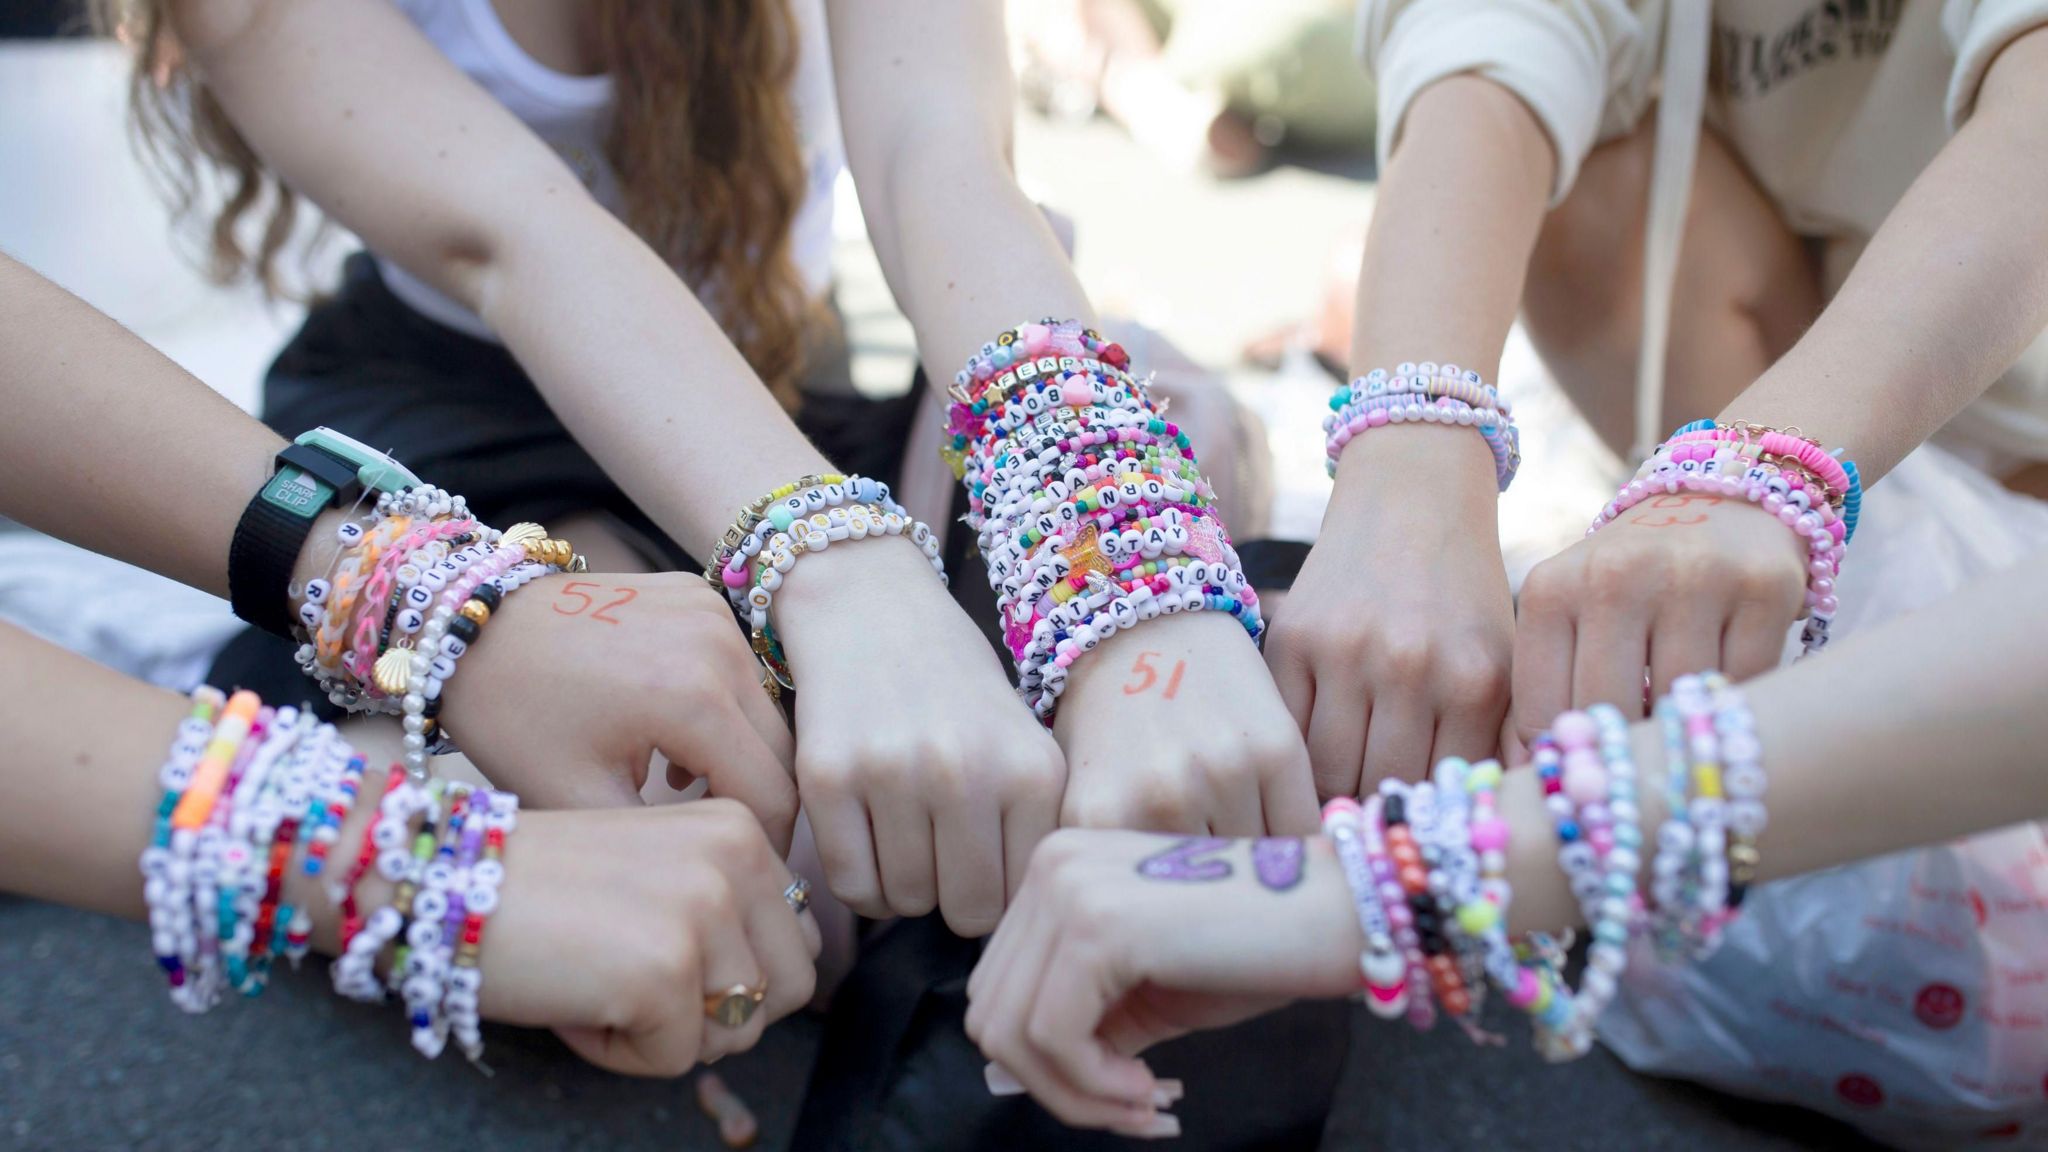 Seven hands together in a circle, showing off the multiple friendship bracelets on the wearers' wrists